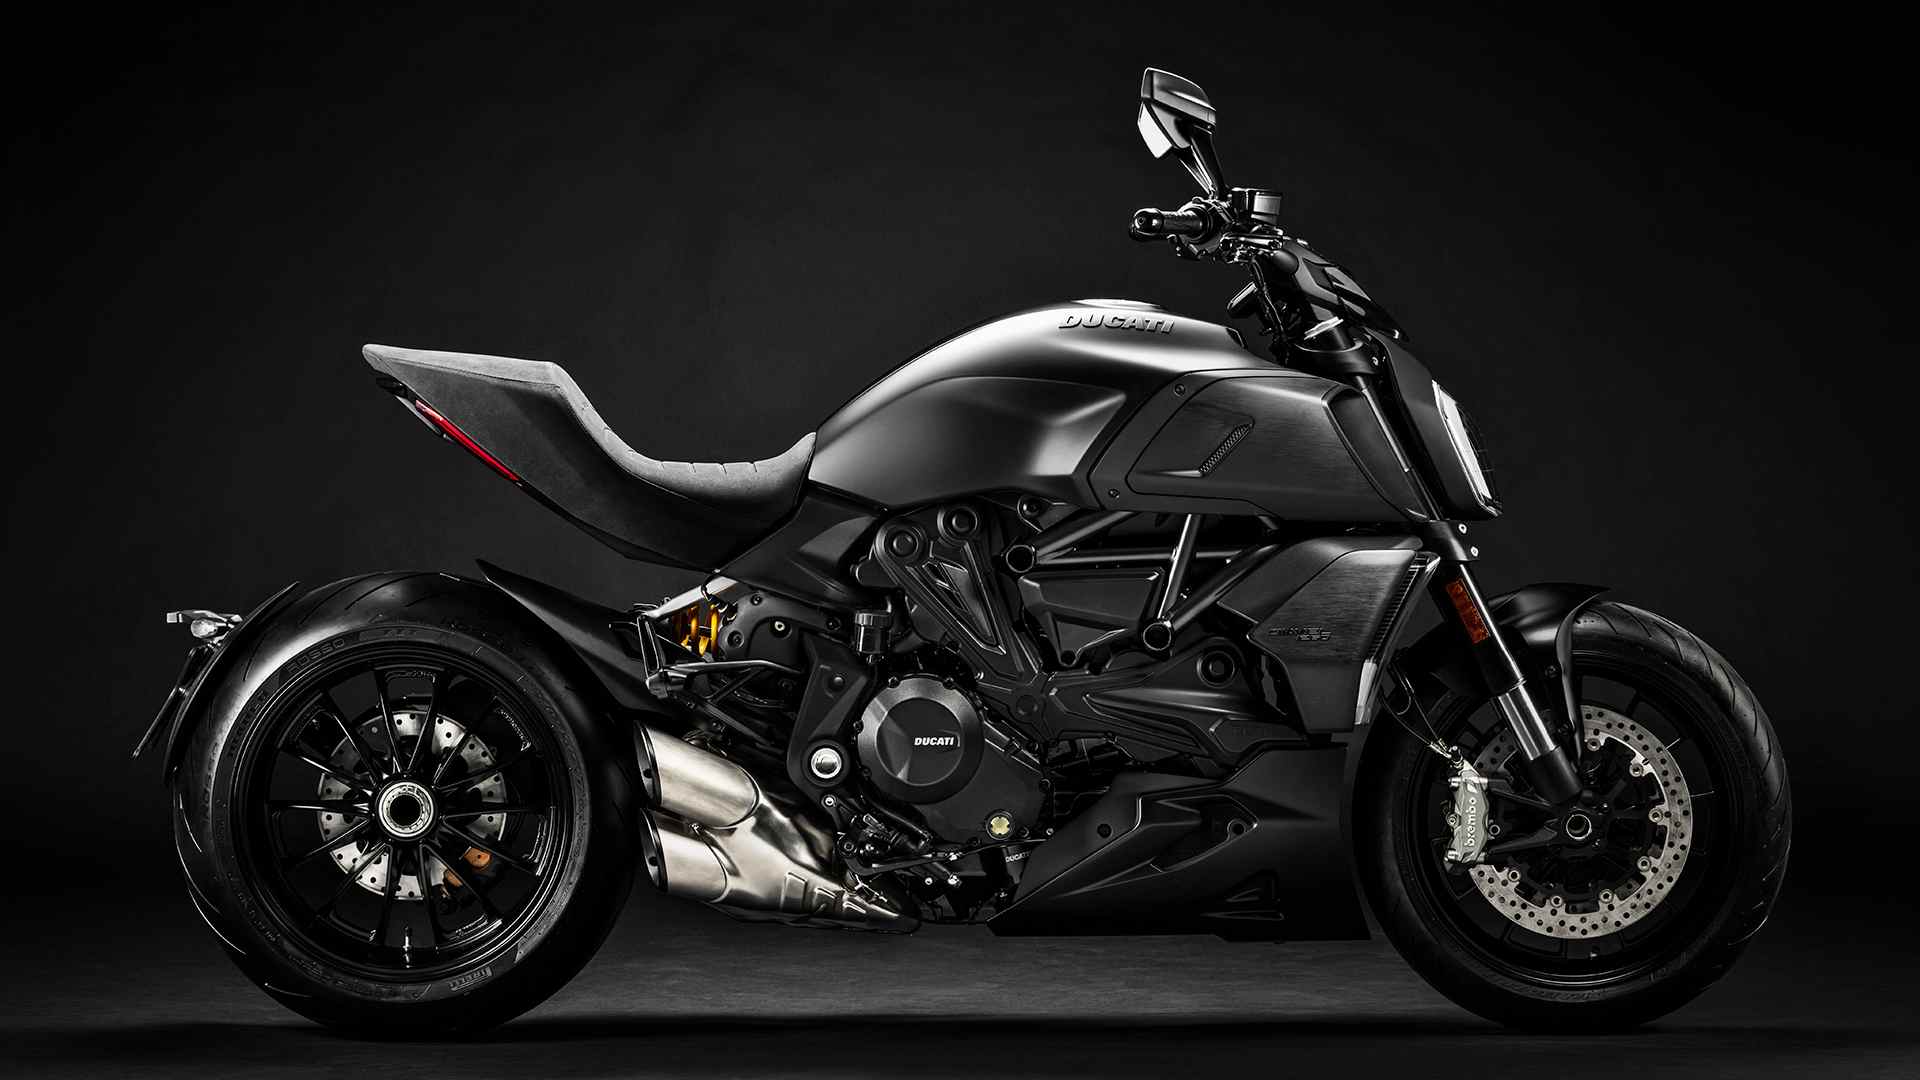 In its BS6 avatar, the Ducati Diavel is slightly heavier but also a little more powerful. Image: Ducati